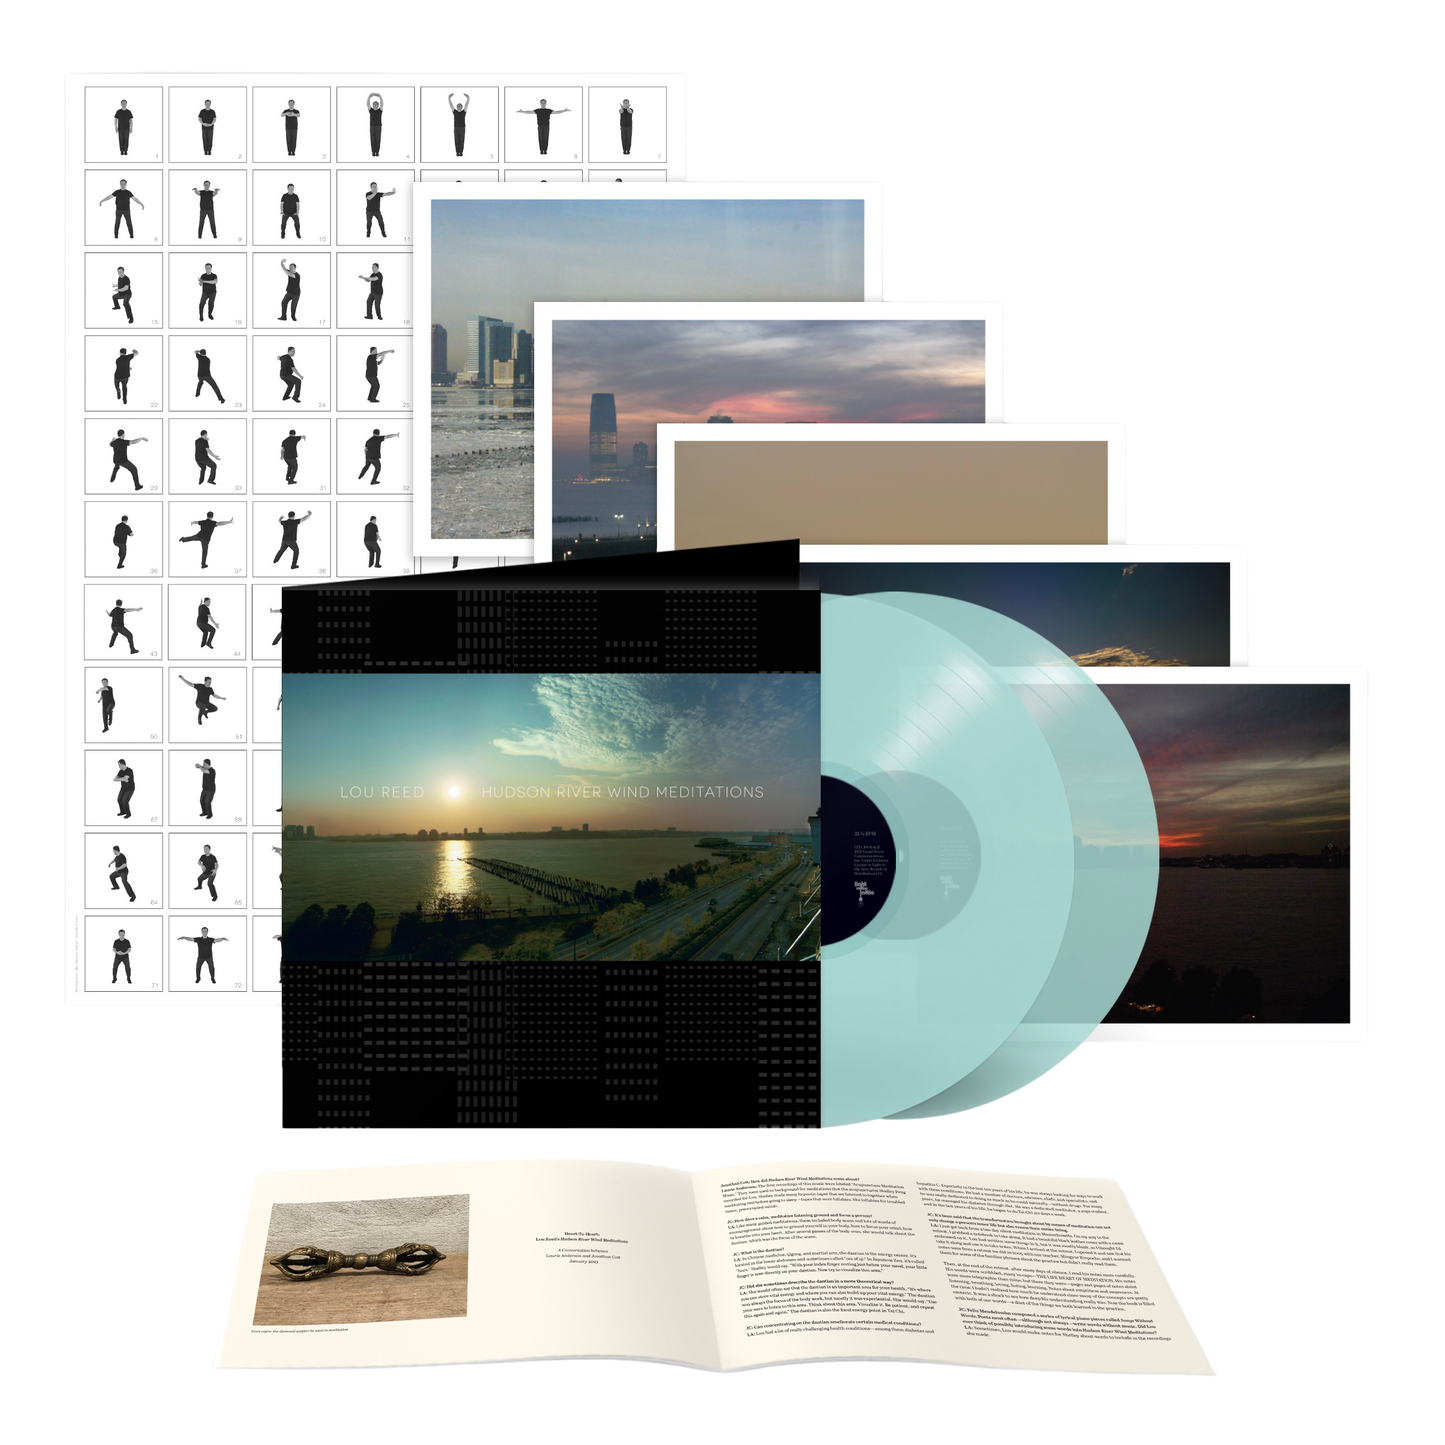 Hudson River Wind Meditations - Deluxe Edition with Coke Bottle LP